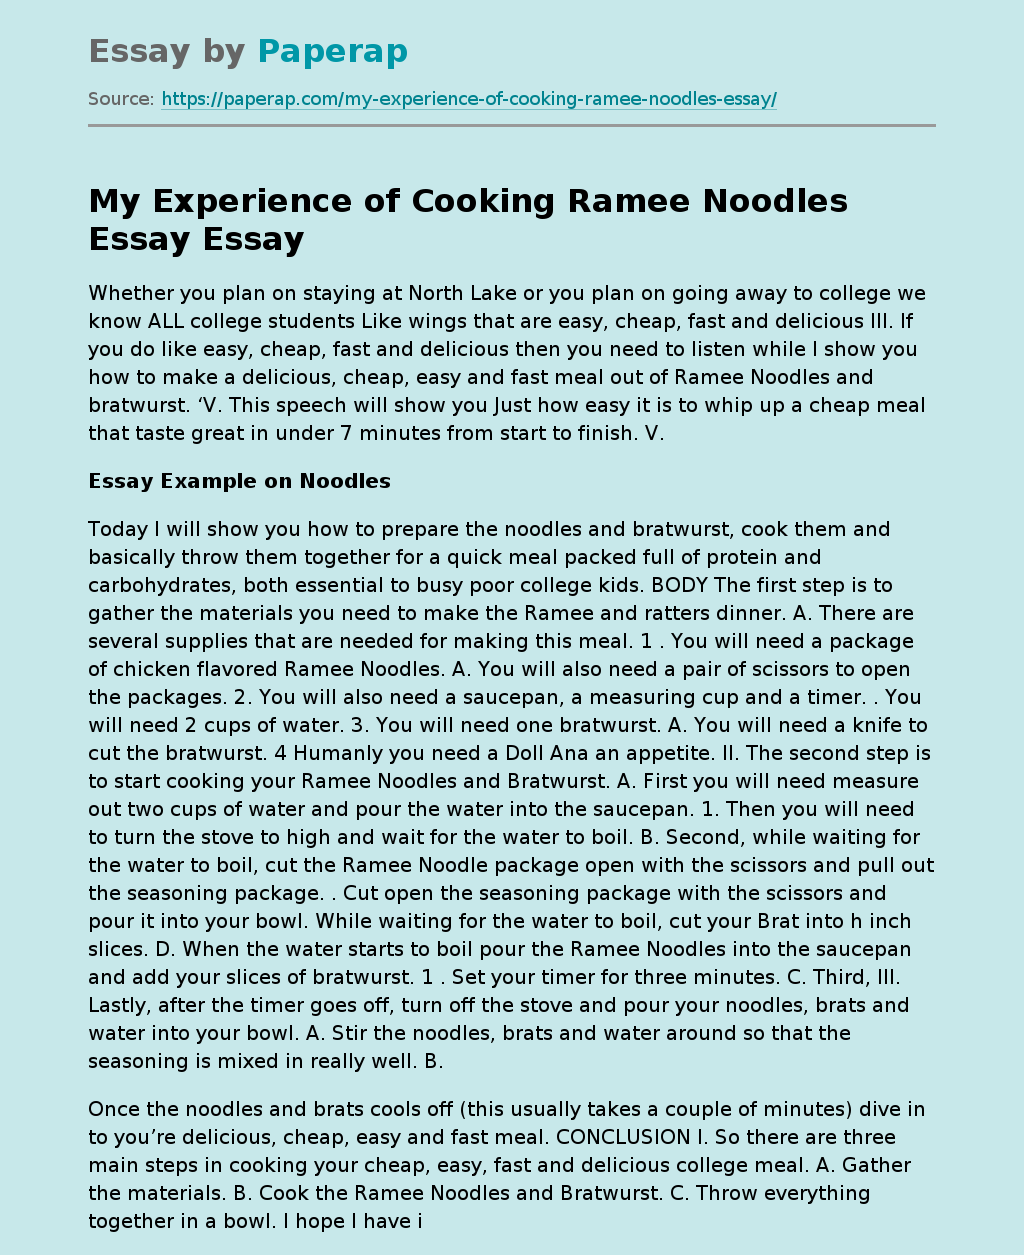 My Experience of Cooking Ramee Noodles Essay